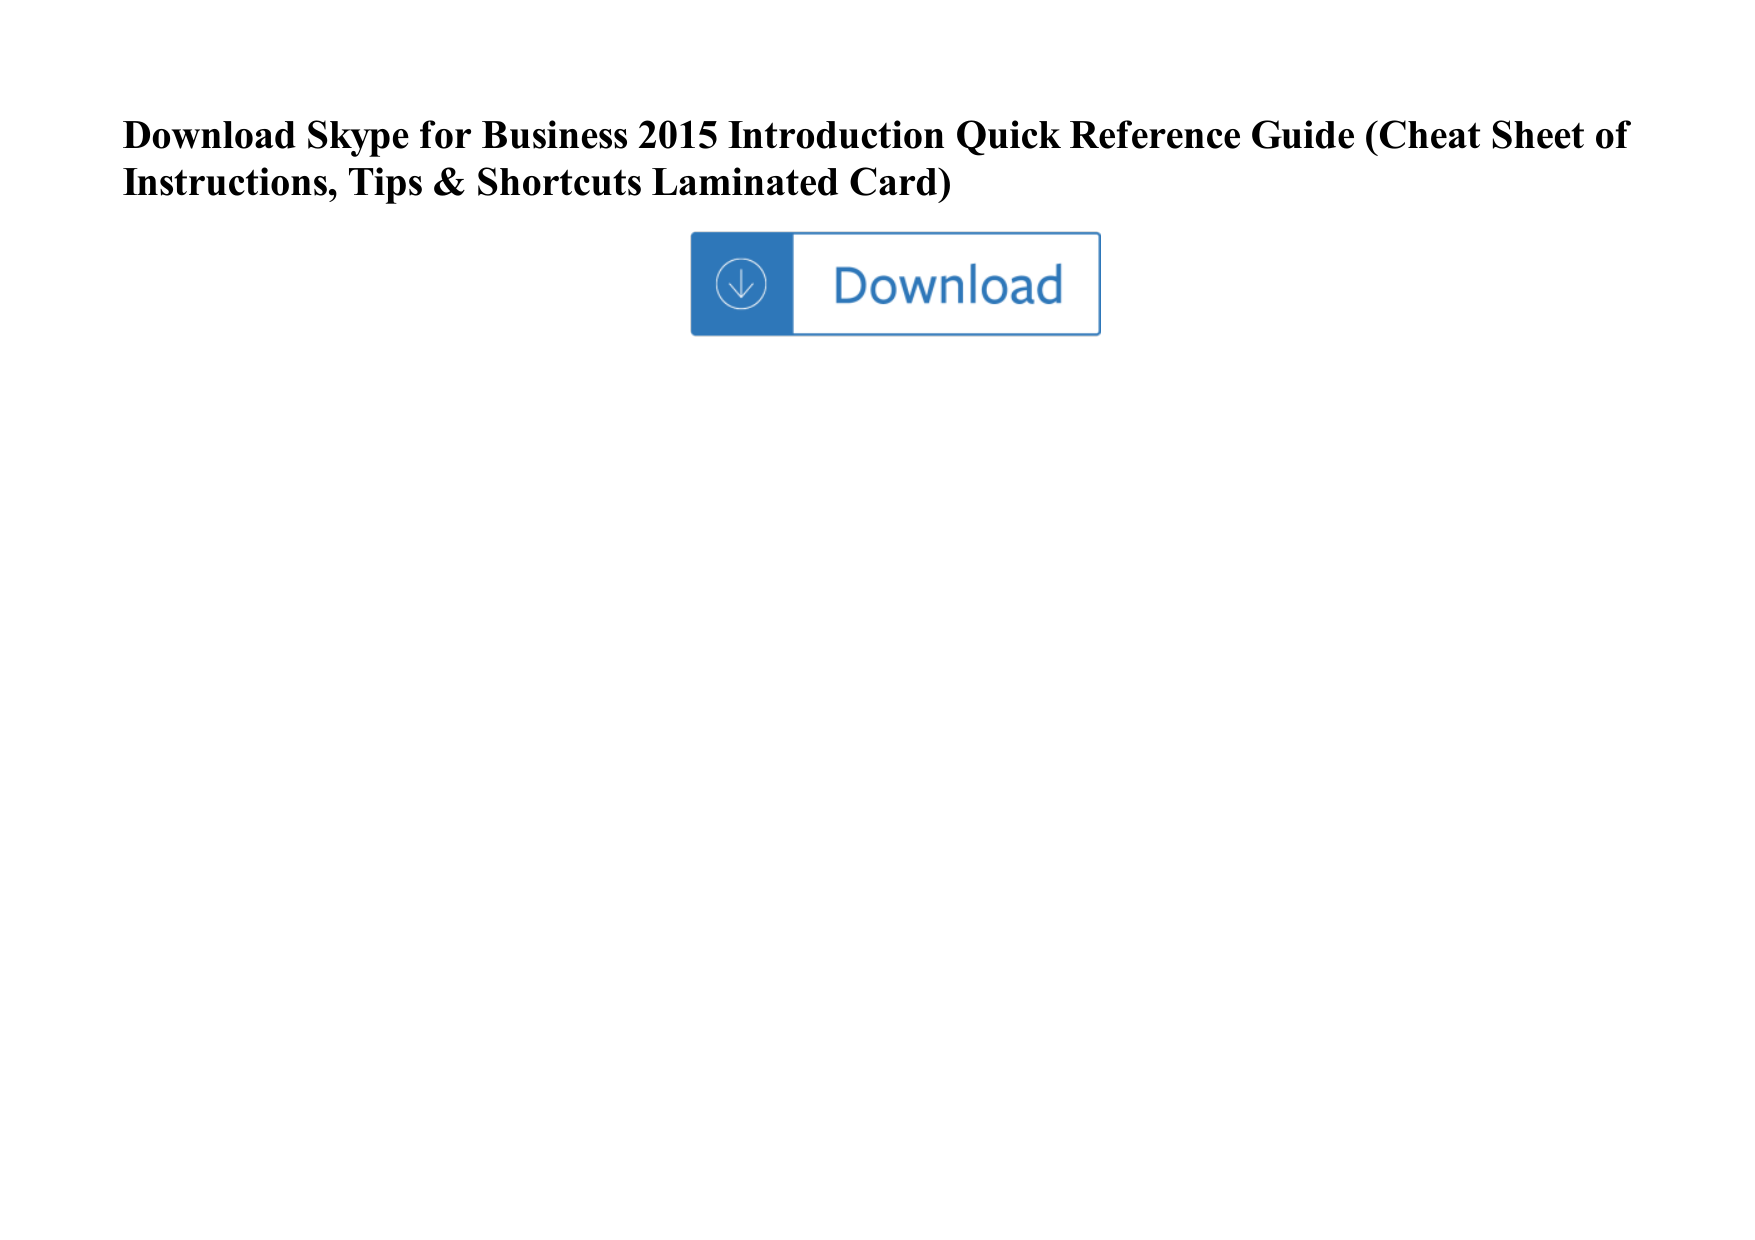 Page 1 of 1 - Skype For Business 2015 Introduction Quick Reference Guide (Cheat Sheet Of Instructions, Tips & Shortcuts  Laminated Card) Skype-for-business-2015-introduction-quick-reference-guide-cheat-sheet-of-instructions-tips-shortcuts-laminated-card